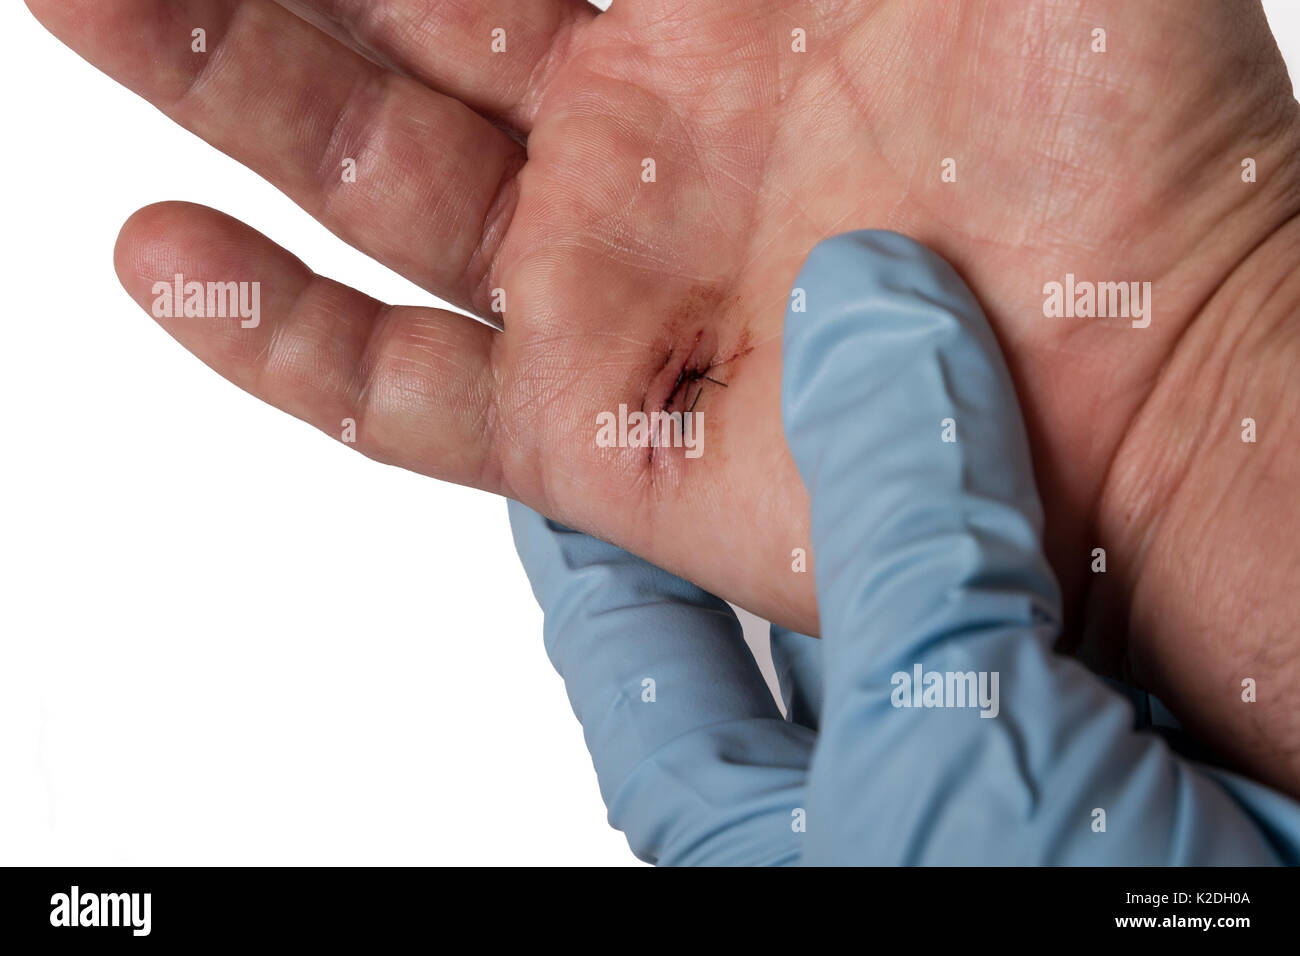 A hand with stitches Stock Photo